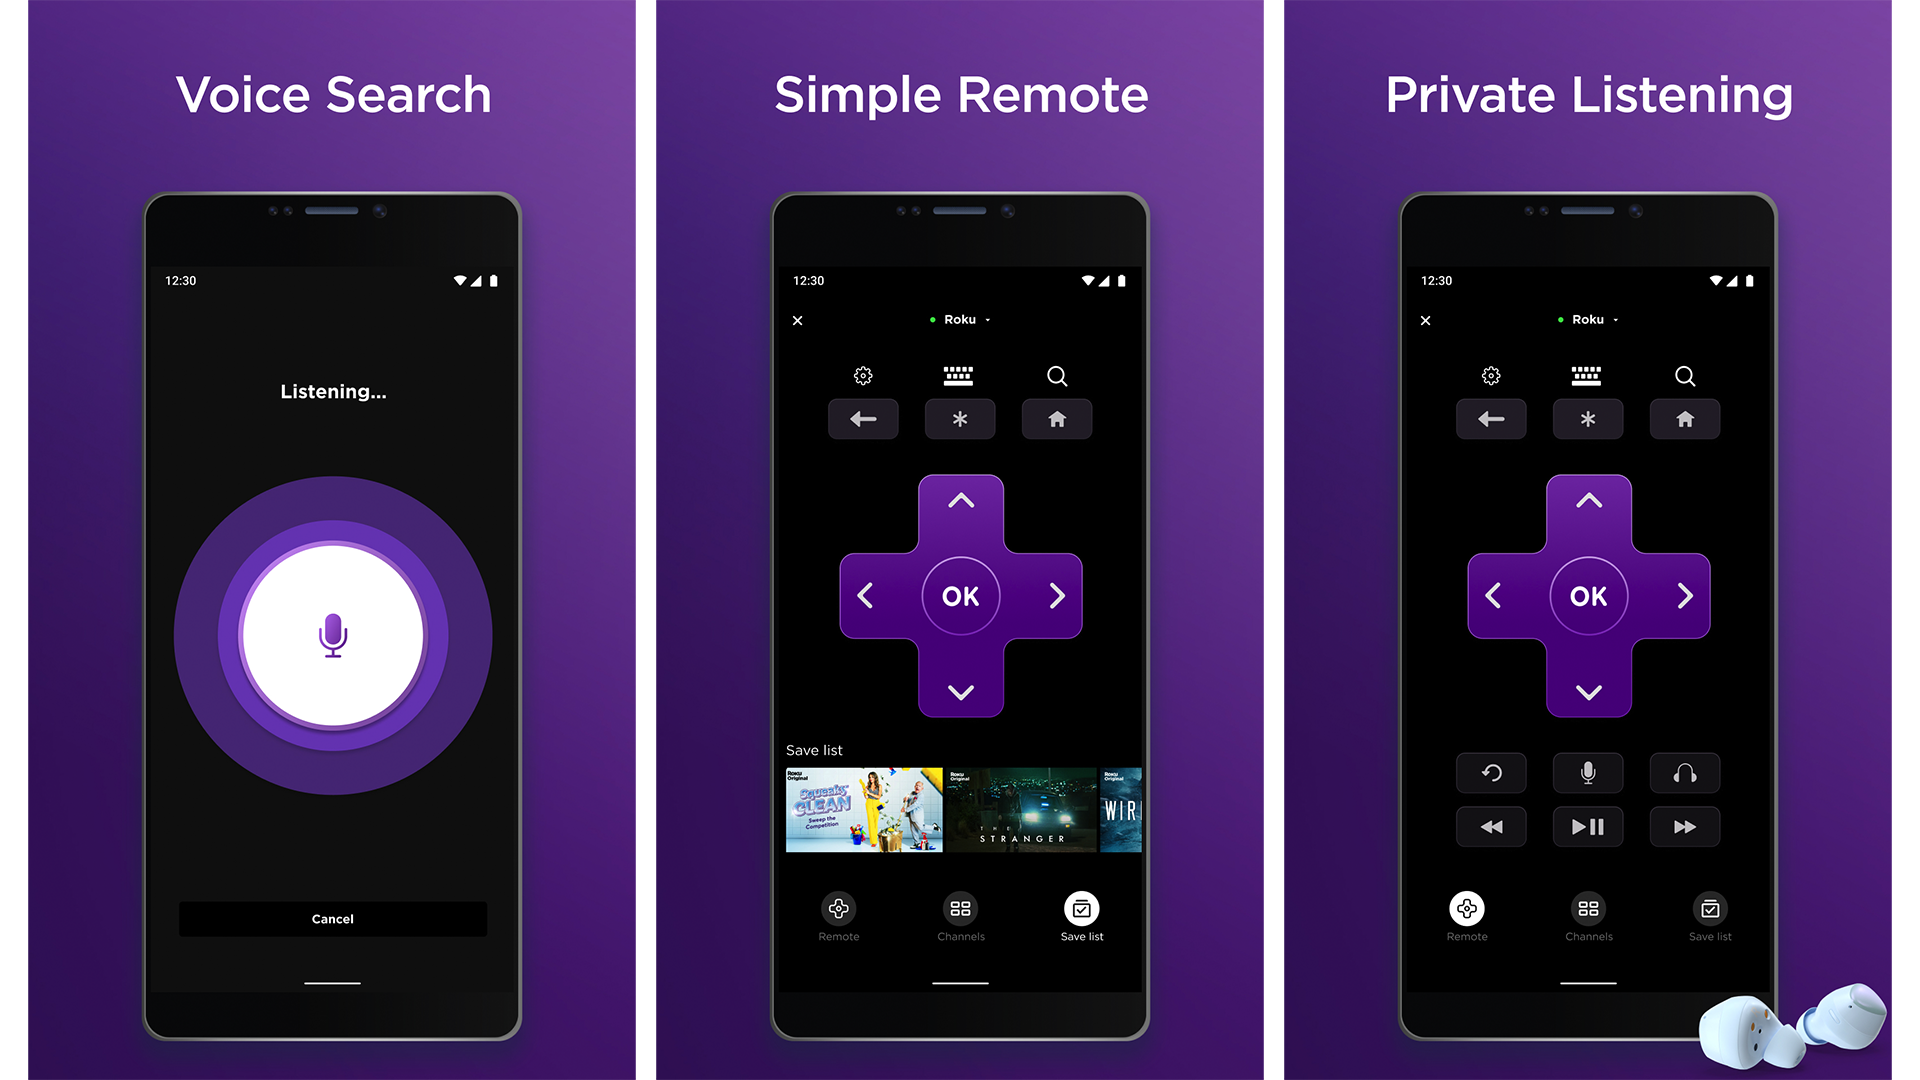 Screenshots showing remote functionality in the Roku app.